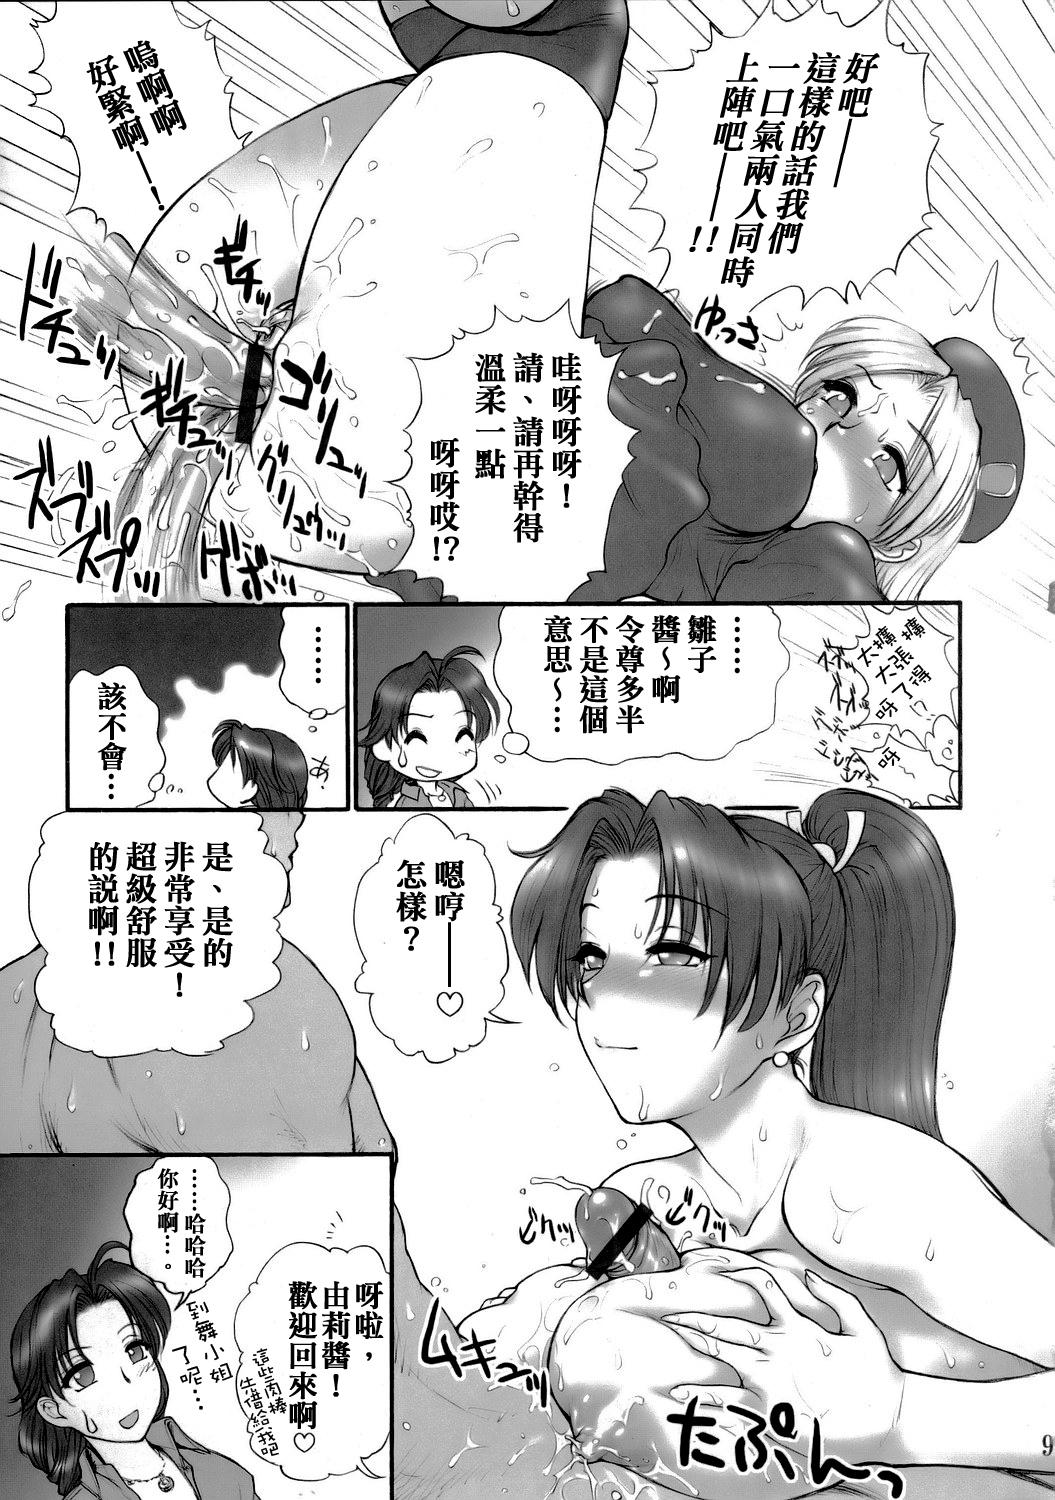 Long (SC29) [Shinnihon Pepsitou (St. Germain-sal)] Report Concerning Kyoku-gen-ryuu (The King of Fighters) [Chinese] [日祈漢化] - King of fighters Yoga - Page 11